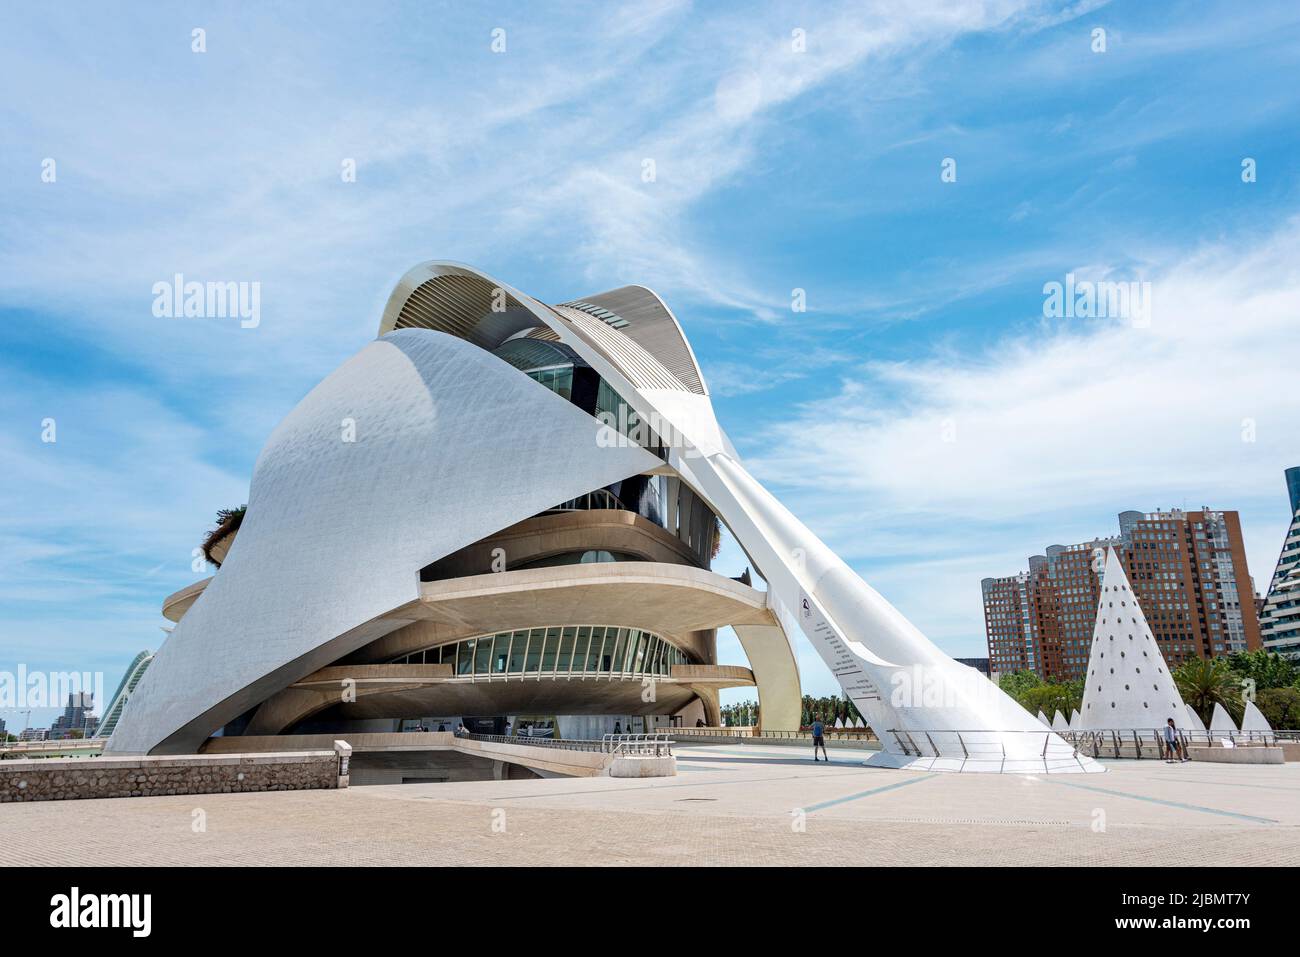 Palau de les Arts Reina Sofía and Opera house in the City Of Arts and Sciences Monuments. Futuristic complex of buildings in Valencia, Stock Photo